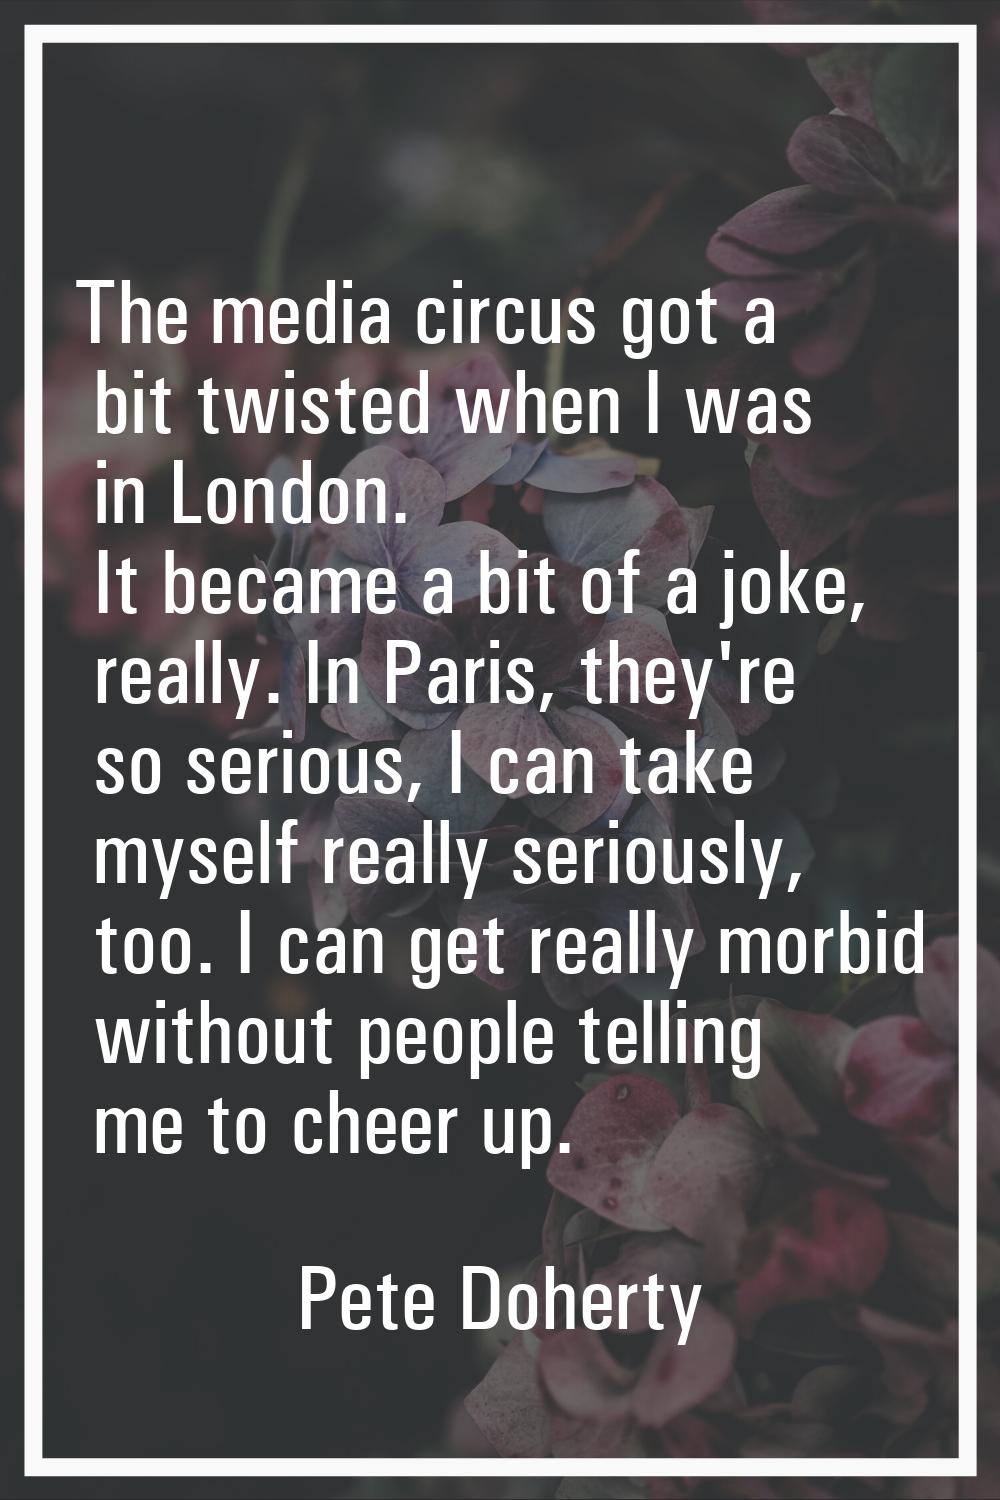 The media circus got a bit twisted when I was in London. It became a bit of a joke, really. In Pari